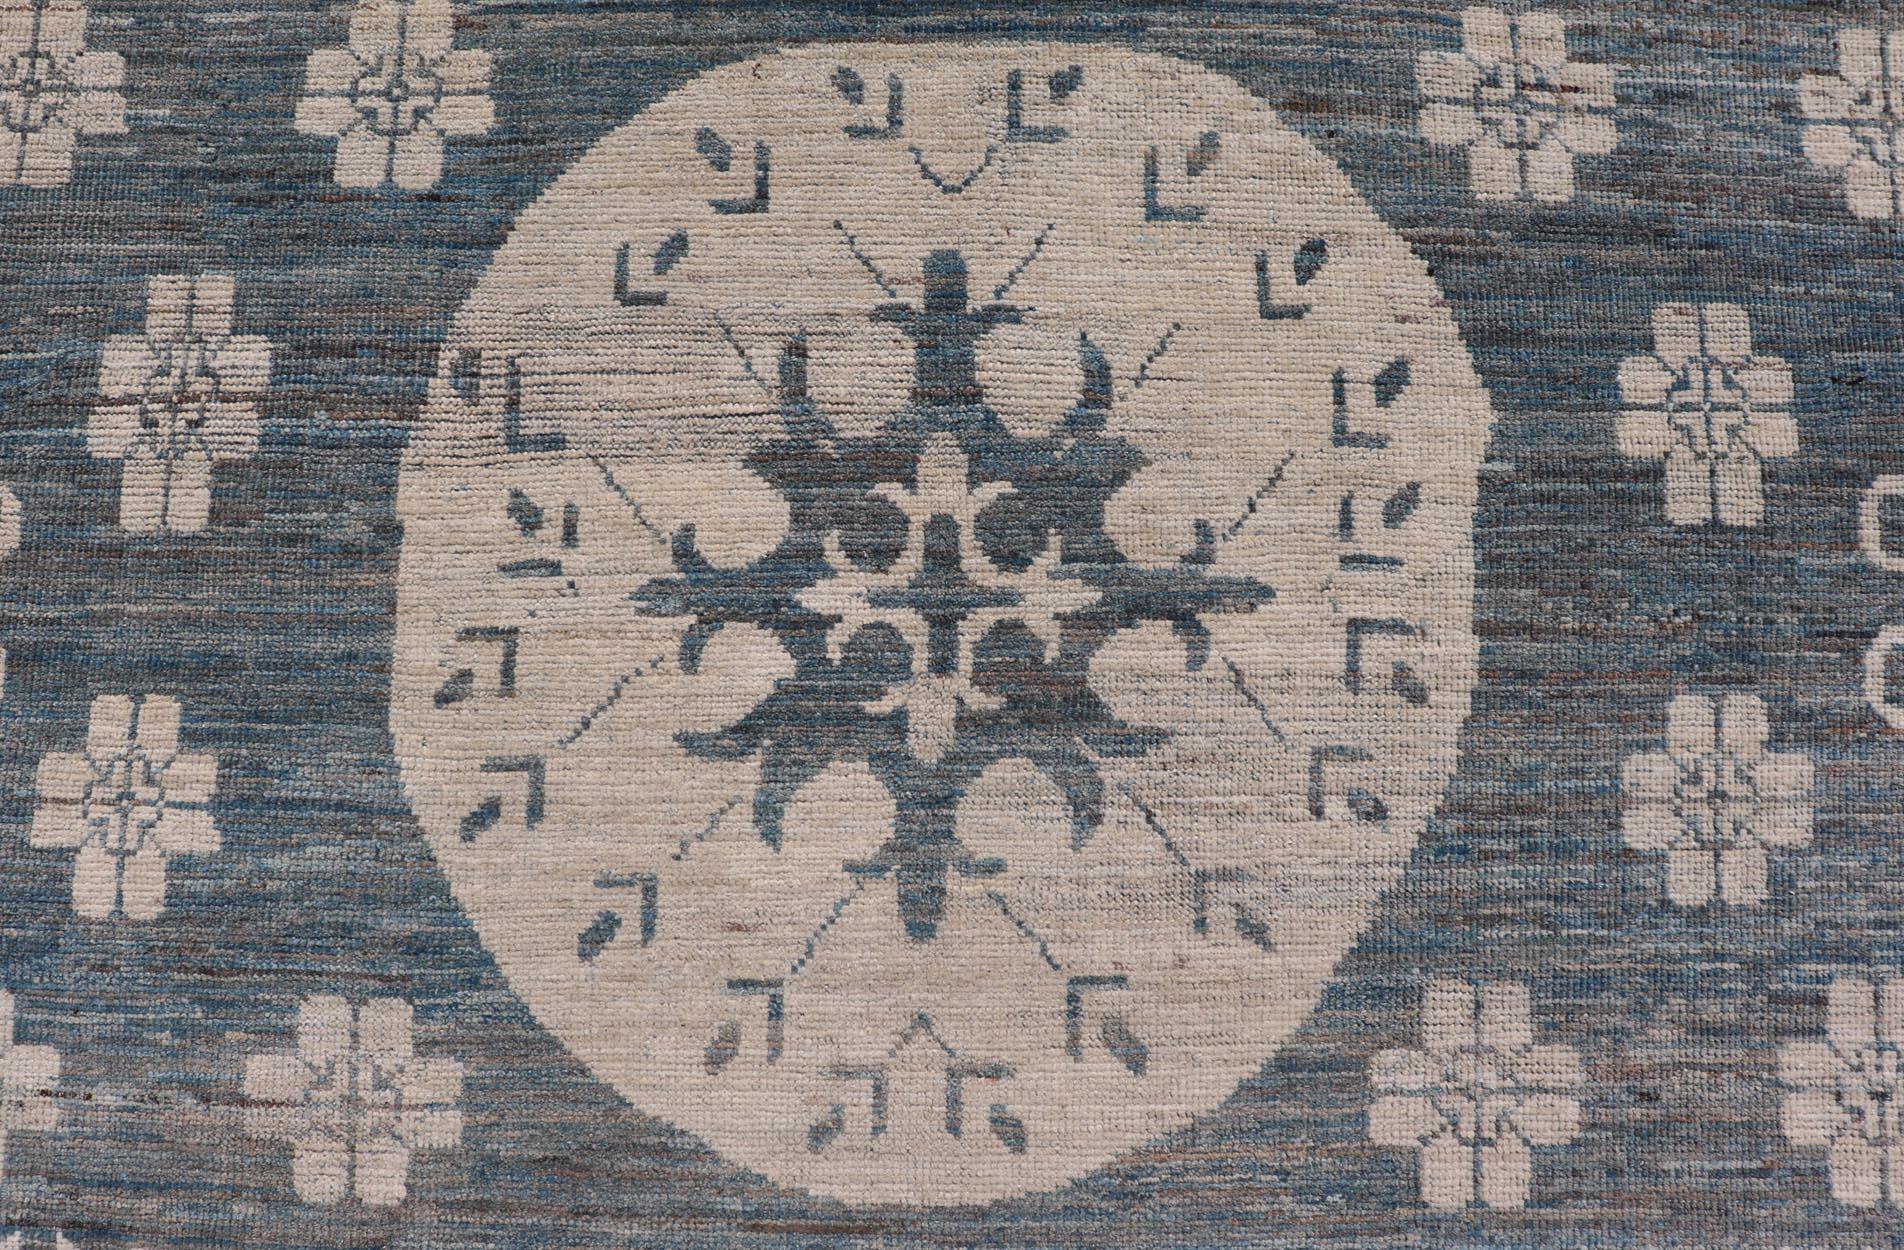 Afghan Modern Khotan Rug with Circular Medallions in Shades of Steel Blue & off White For Sale